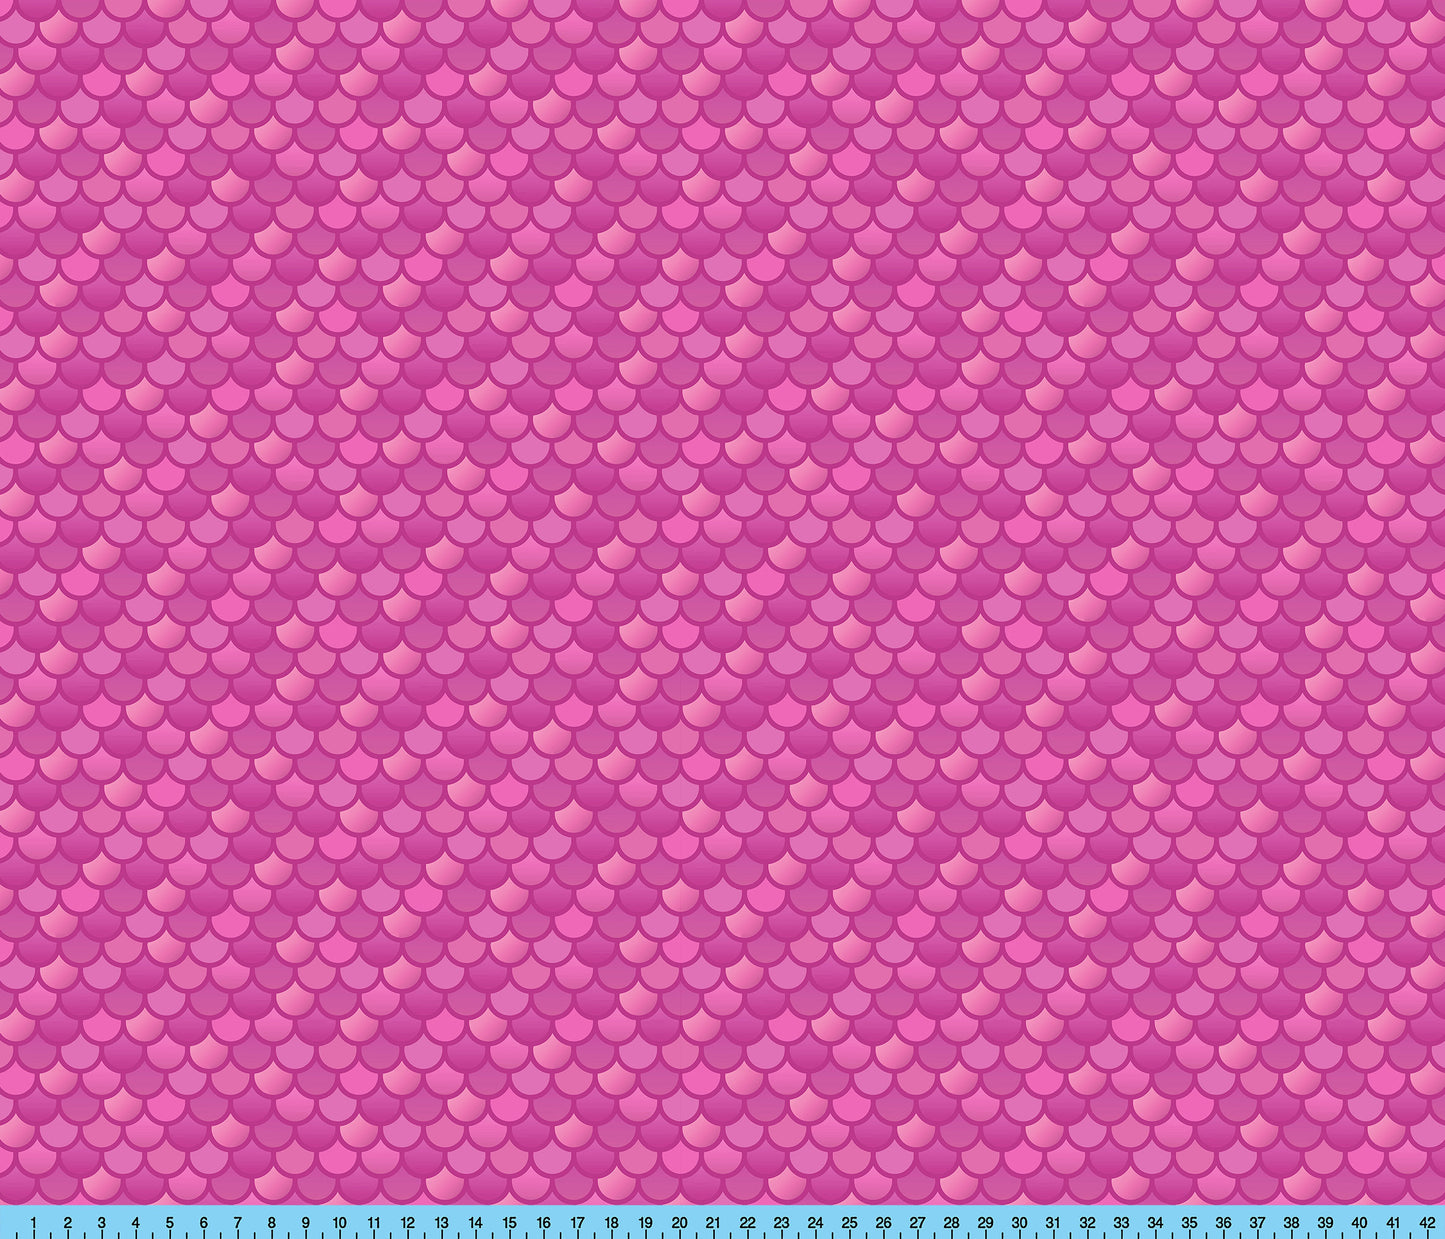 Pink Mermaid Scales Fabric By the Yard, Half Yard and Fat Quarter